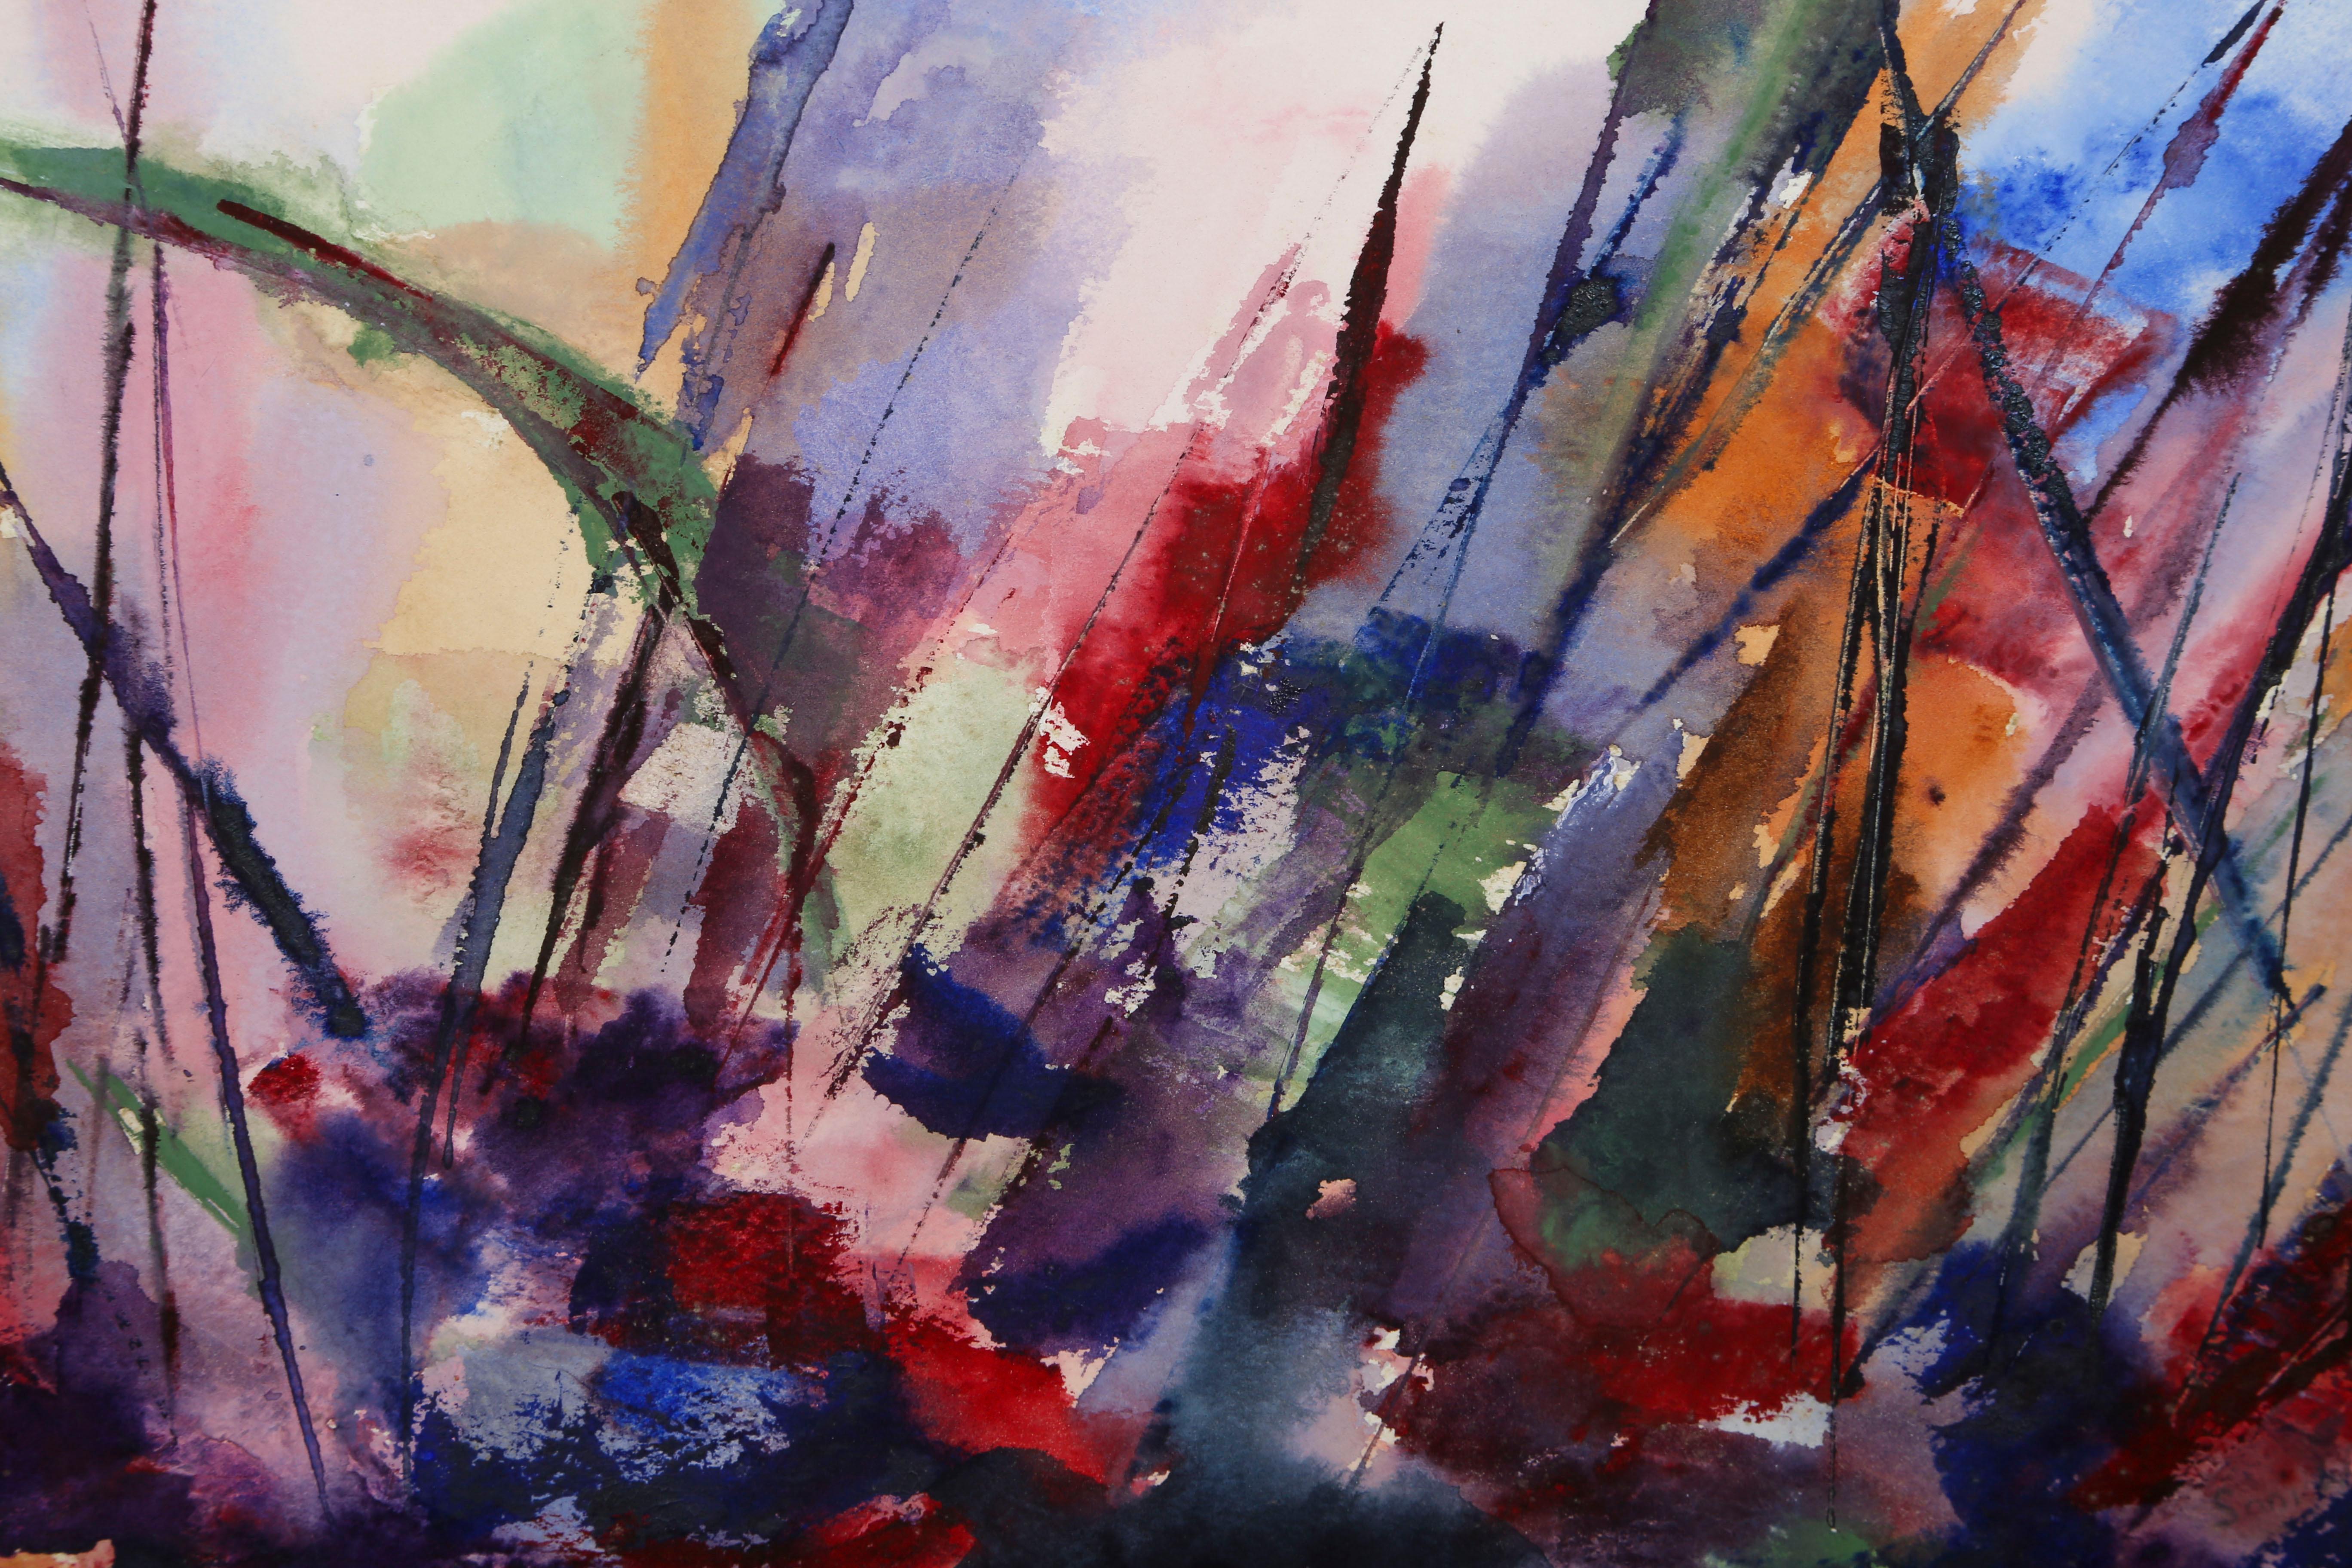 Artist: Soni Wallace
Title: Untitled - Abstract 
Year: circa 1962
Medium: Watercolor 
Size: 9.5 in. x 14 in. (24.13 cm x 35.56 cm)